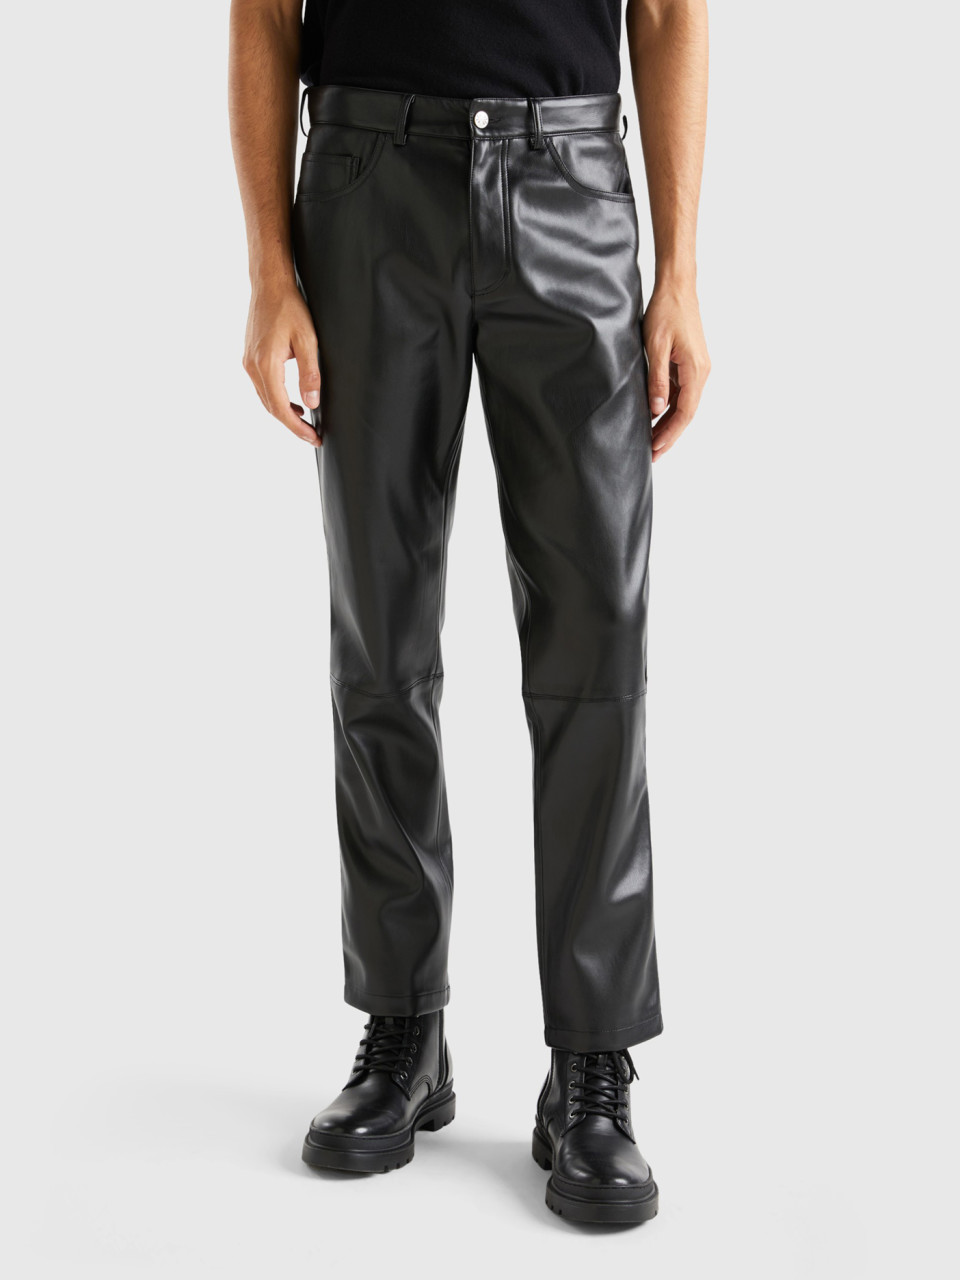 Benetton, Trousers In Imitation Leather Fabric, Black, Men